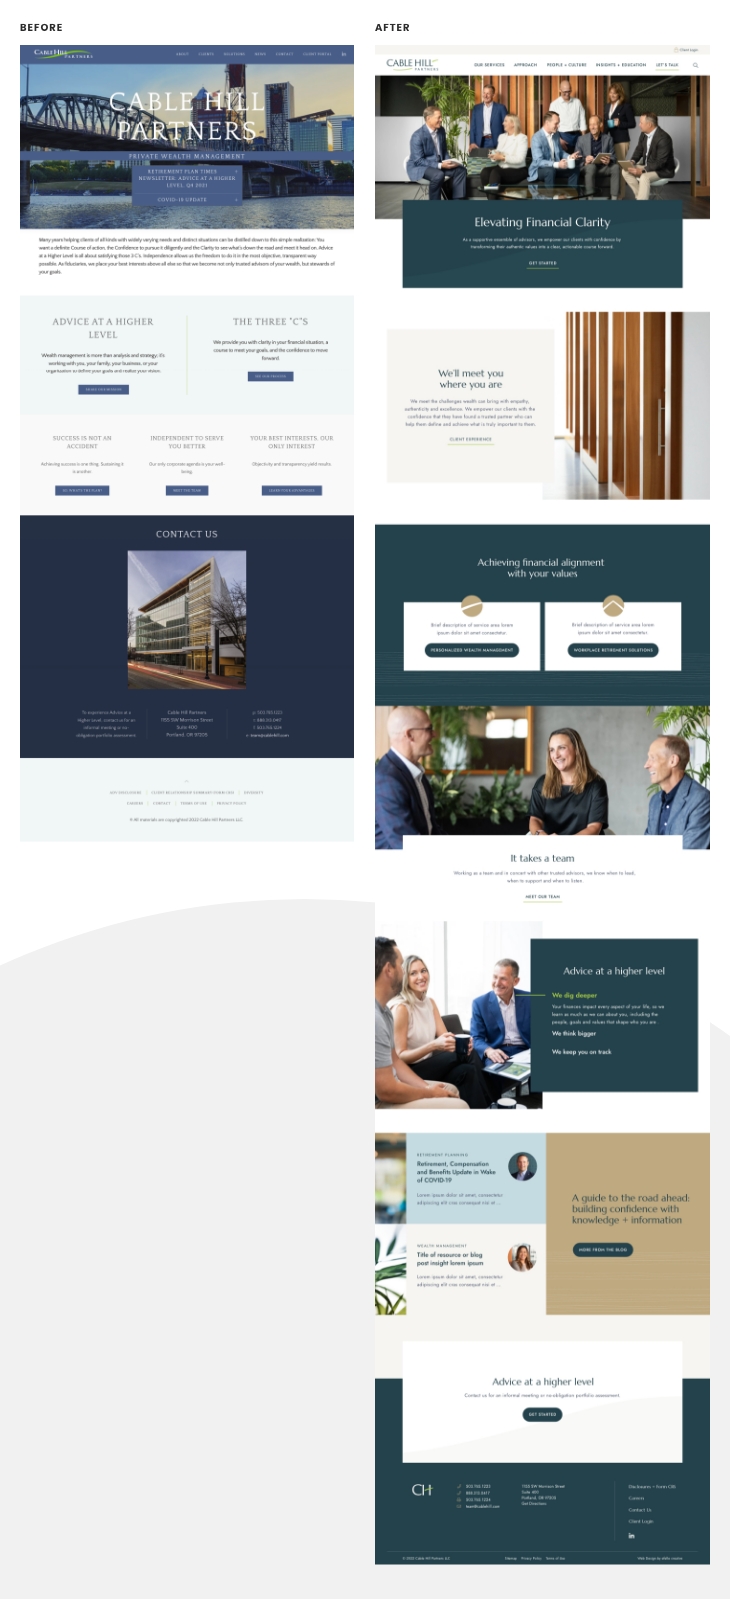 website_redesign_for_financial_advisors_cable_hill_partners_in_portland_or_portfolio_before-after.jpg